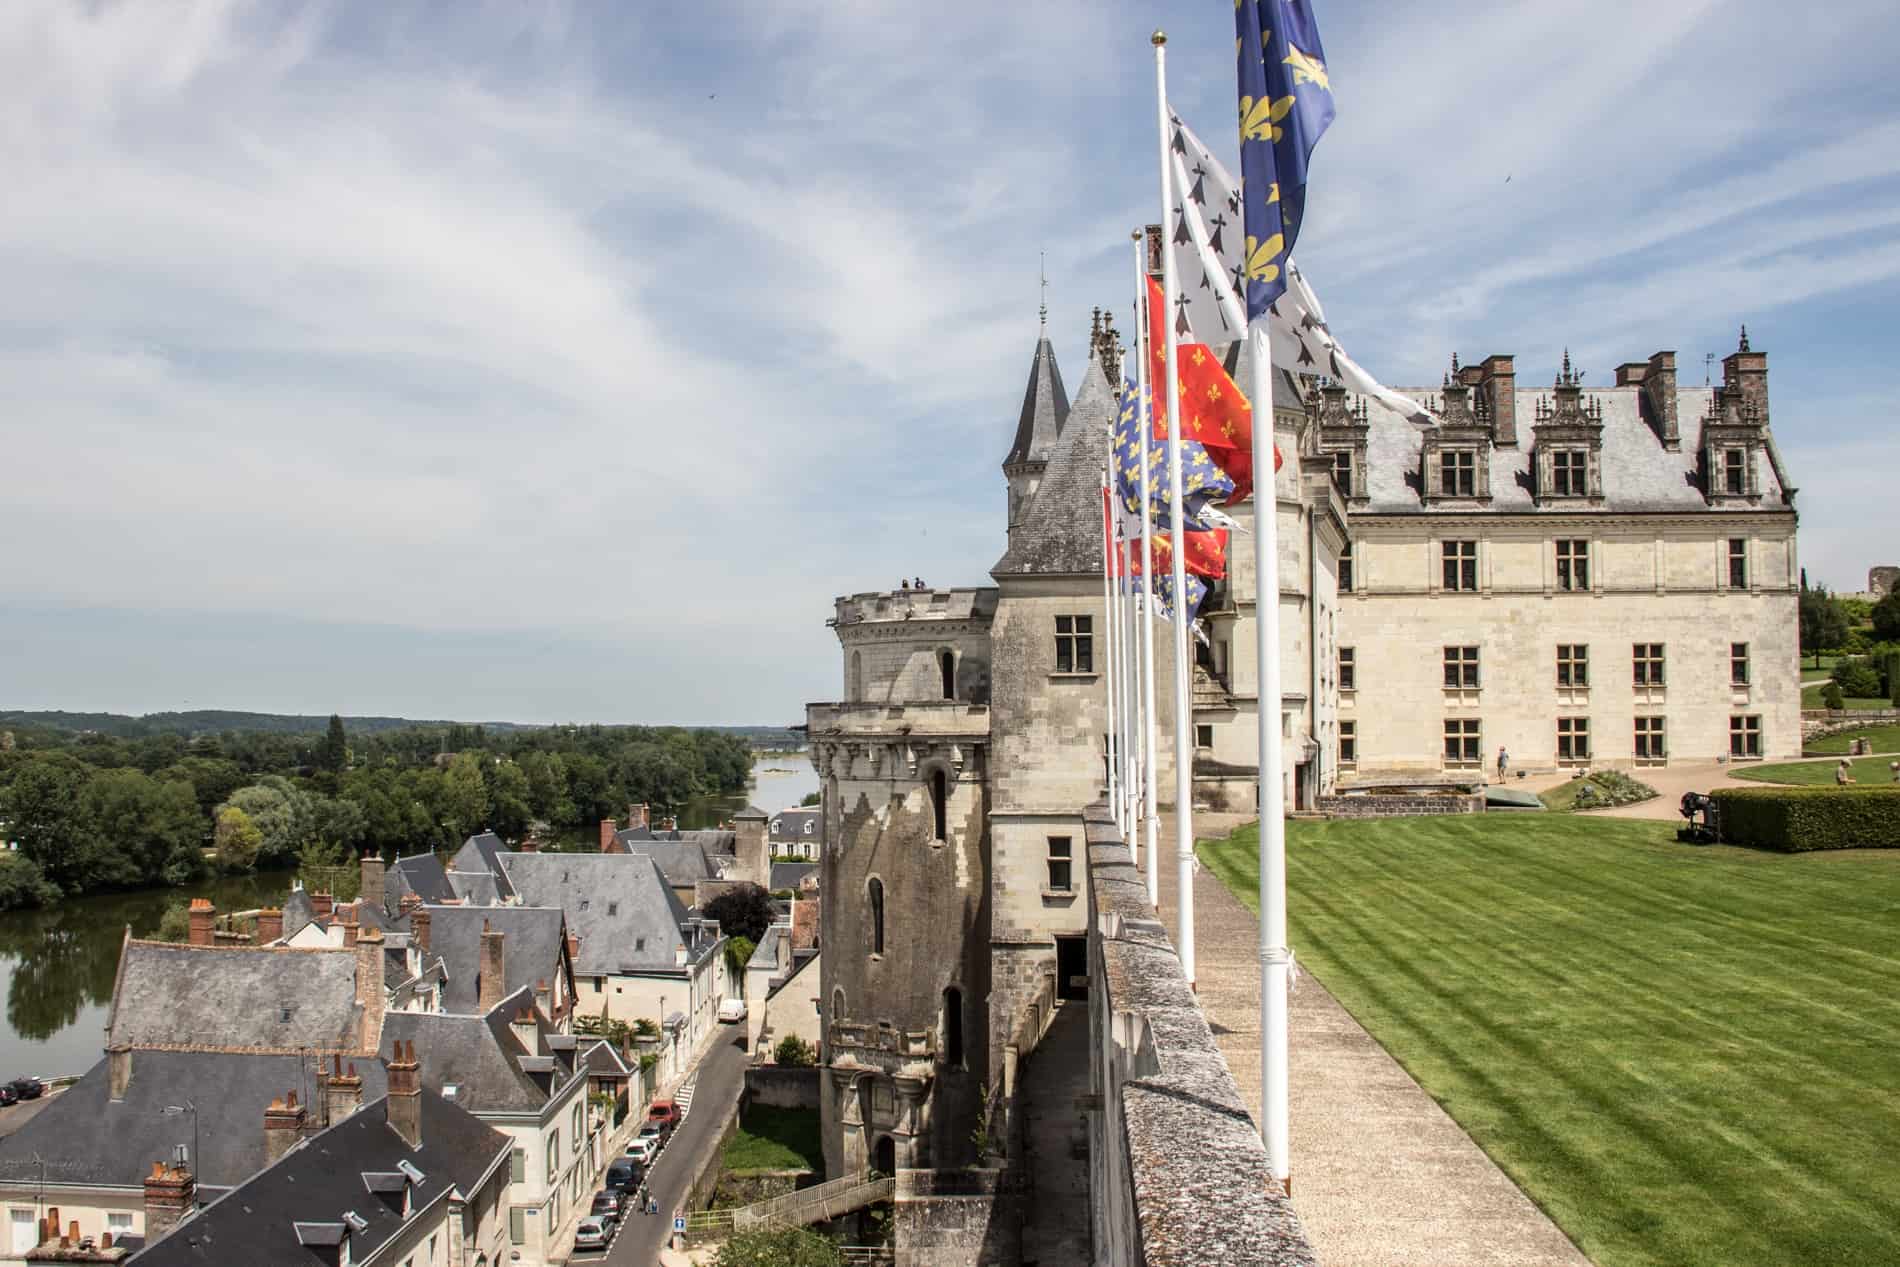 The garden grounds of the the royal castle of Amboise perched on a ledge overlooking the town. 